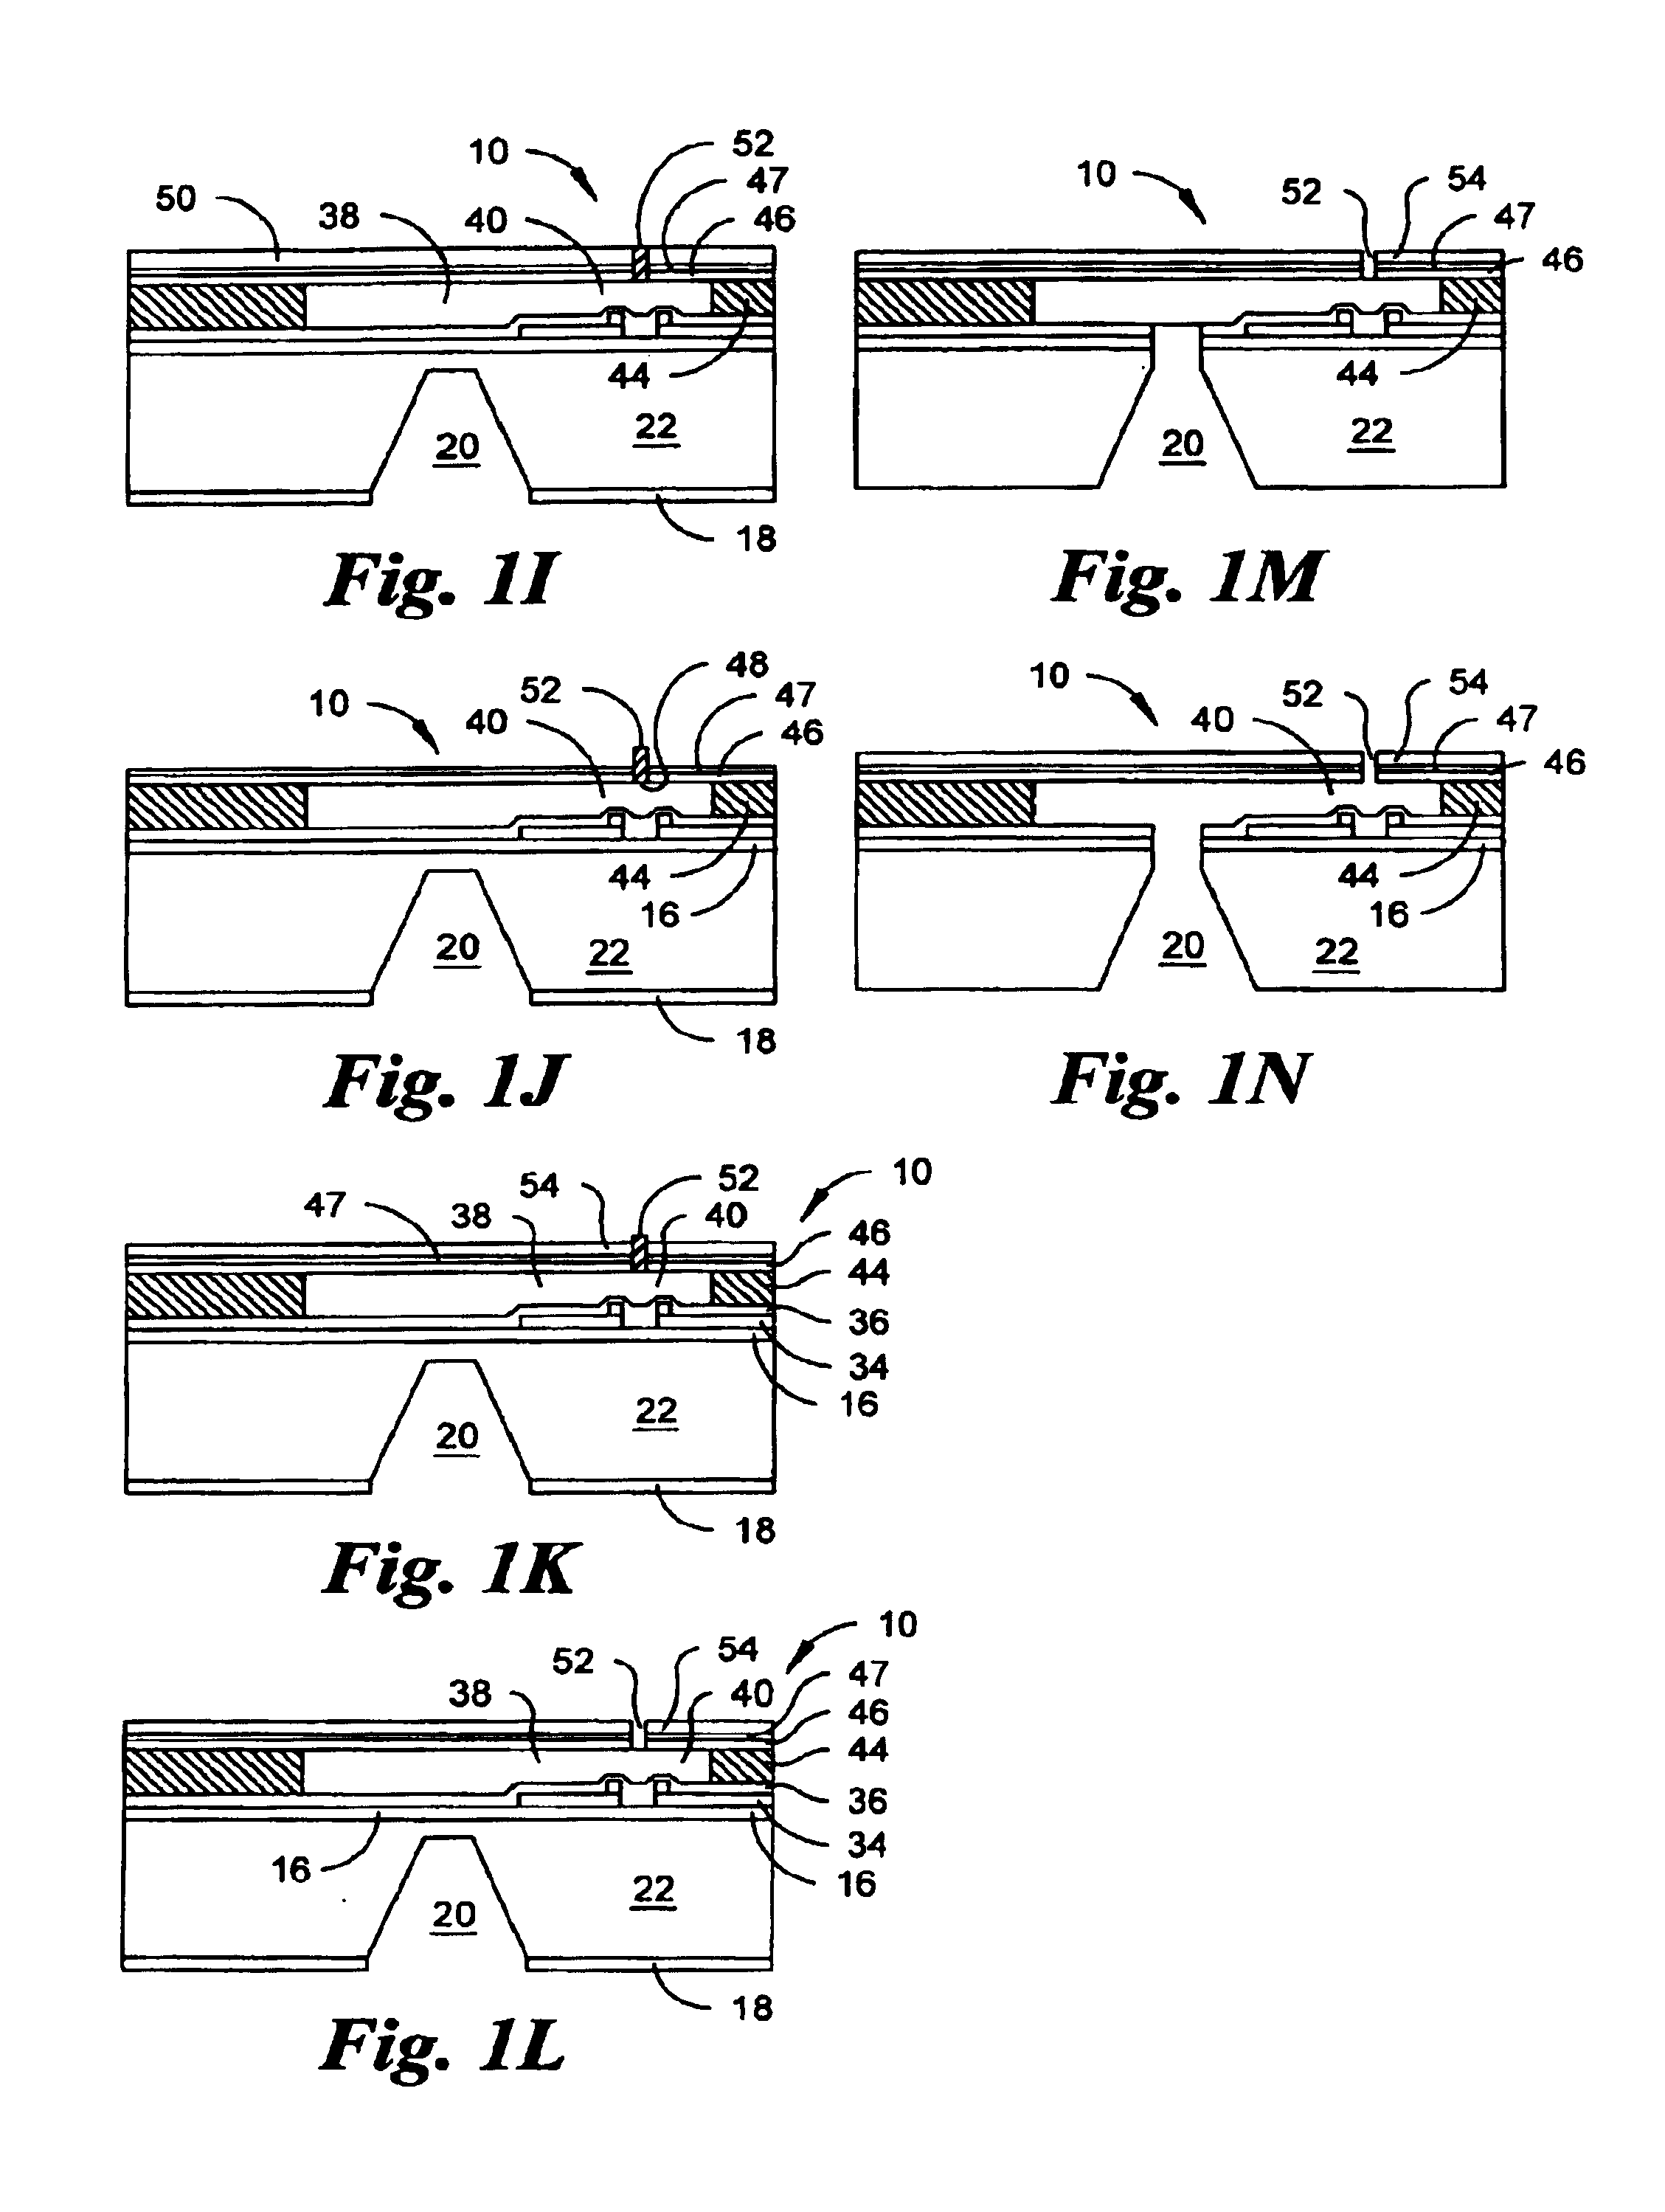 Method for fabricating an integrated nozzle plate and multi-level micro-fluidic devices fabricated